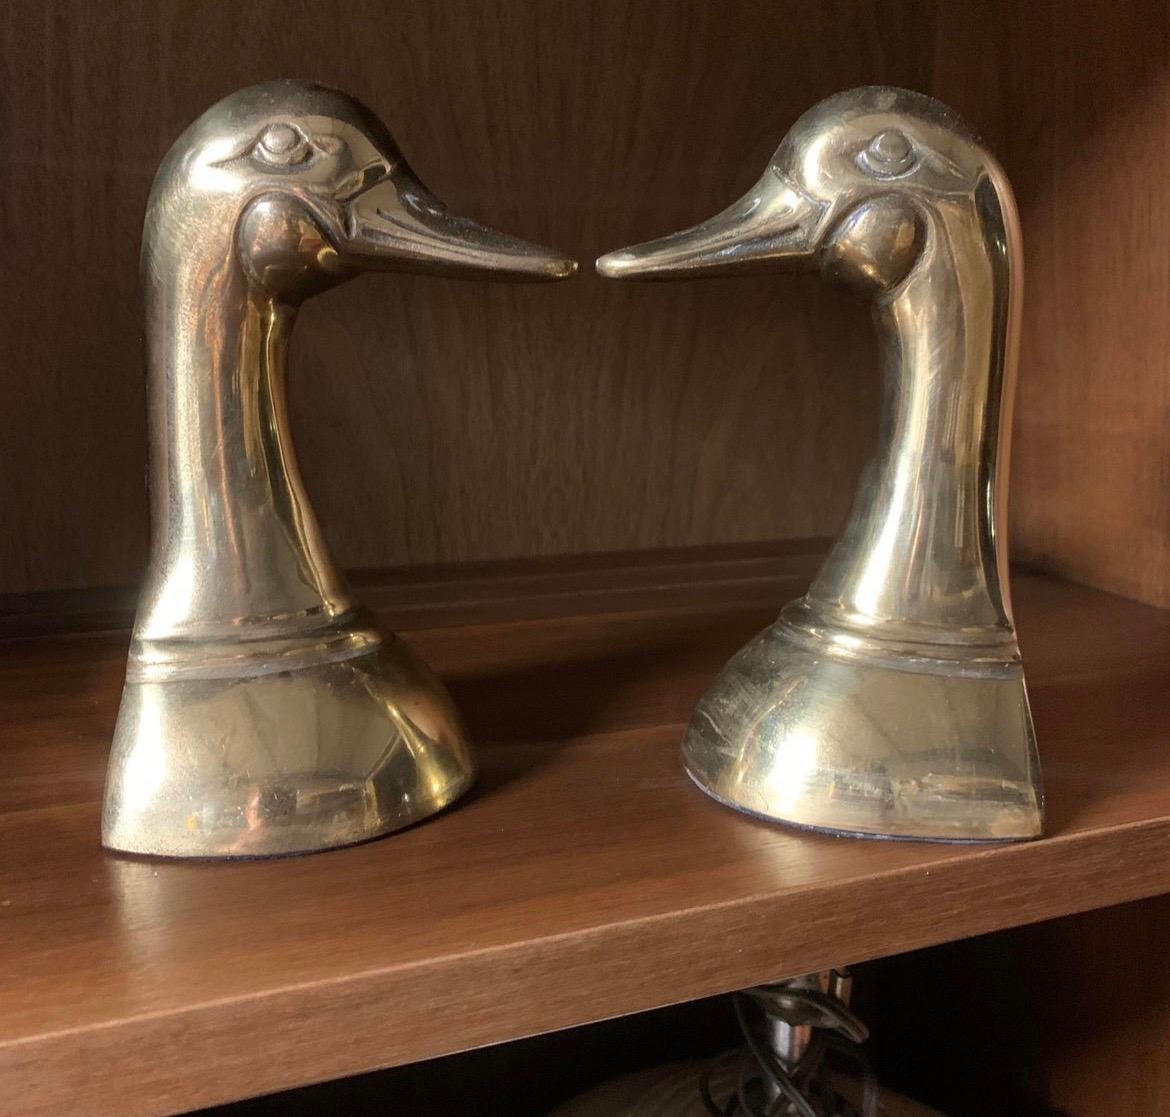 A Classic pair of vintage brass bookends, a pair of duck heads. Made in Korea likely during the 1960s or 1970s. The bookends are not lacquered allowing a rich patina to show with age.